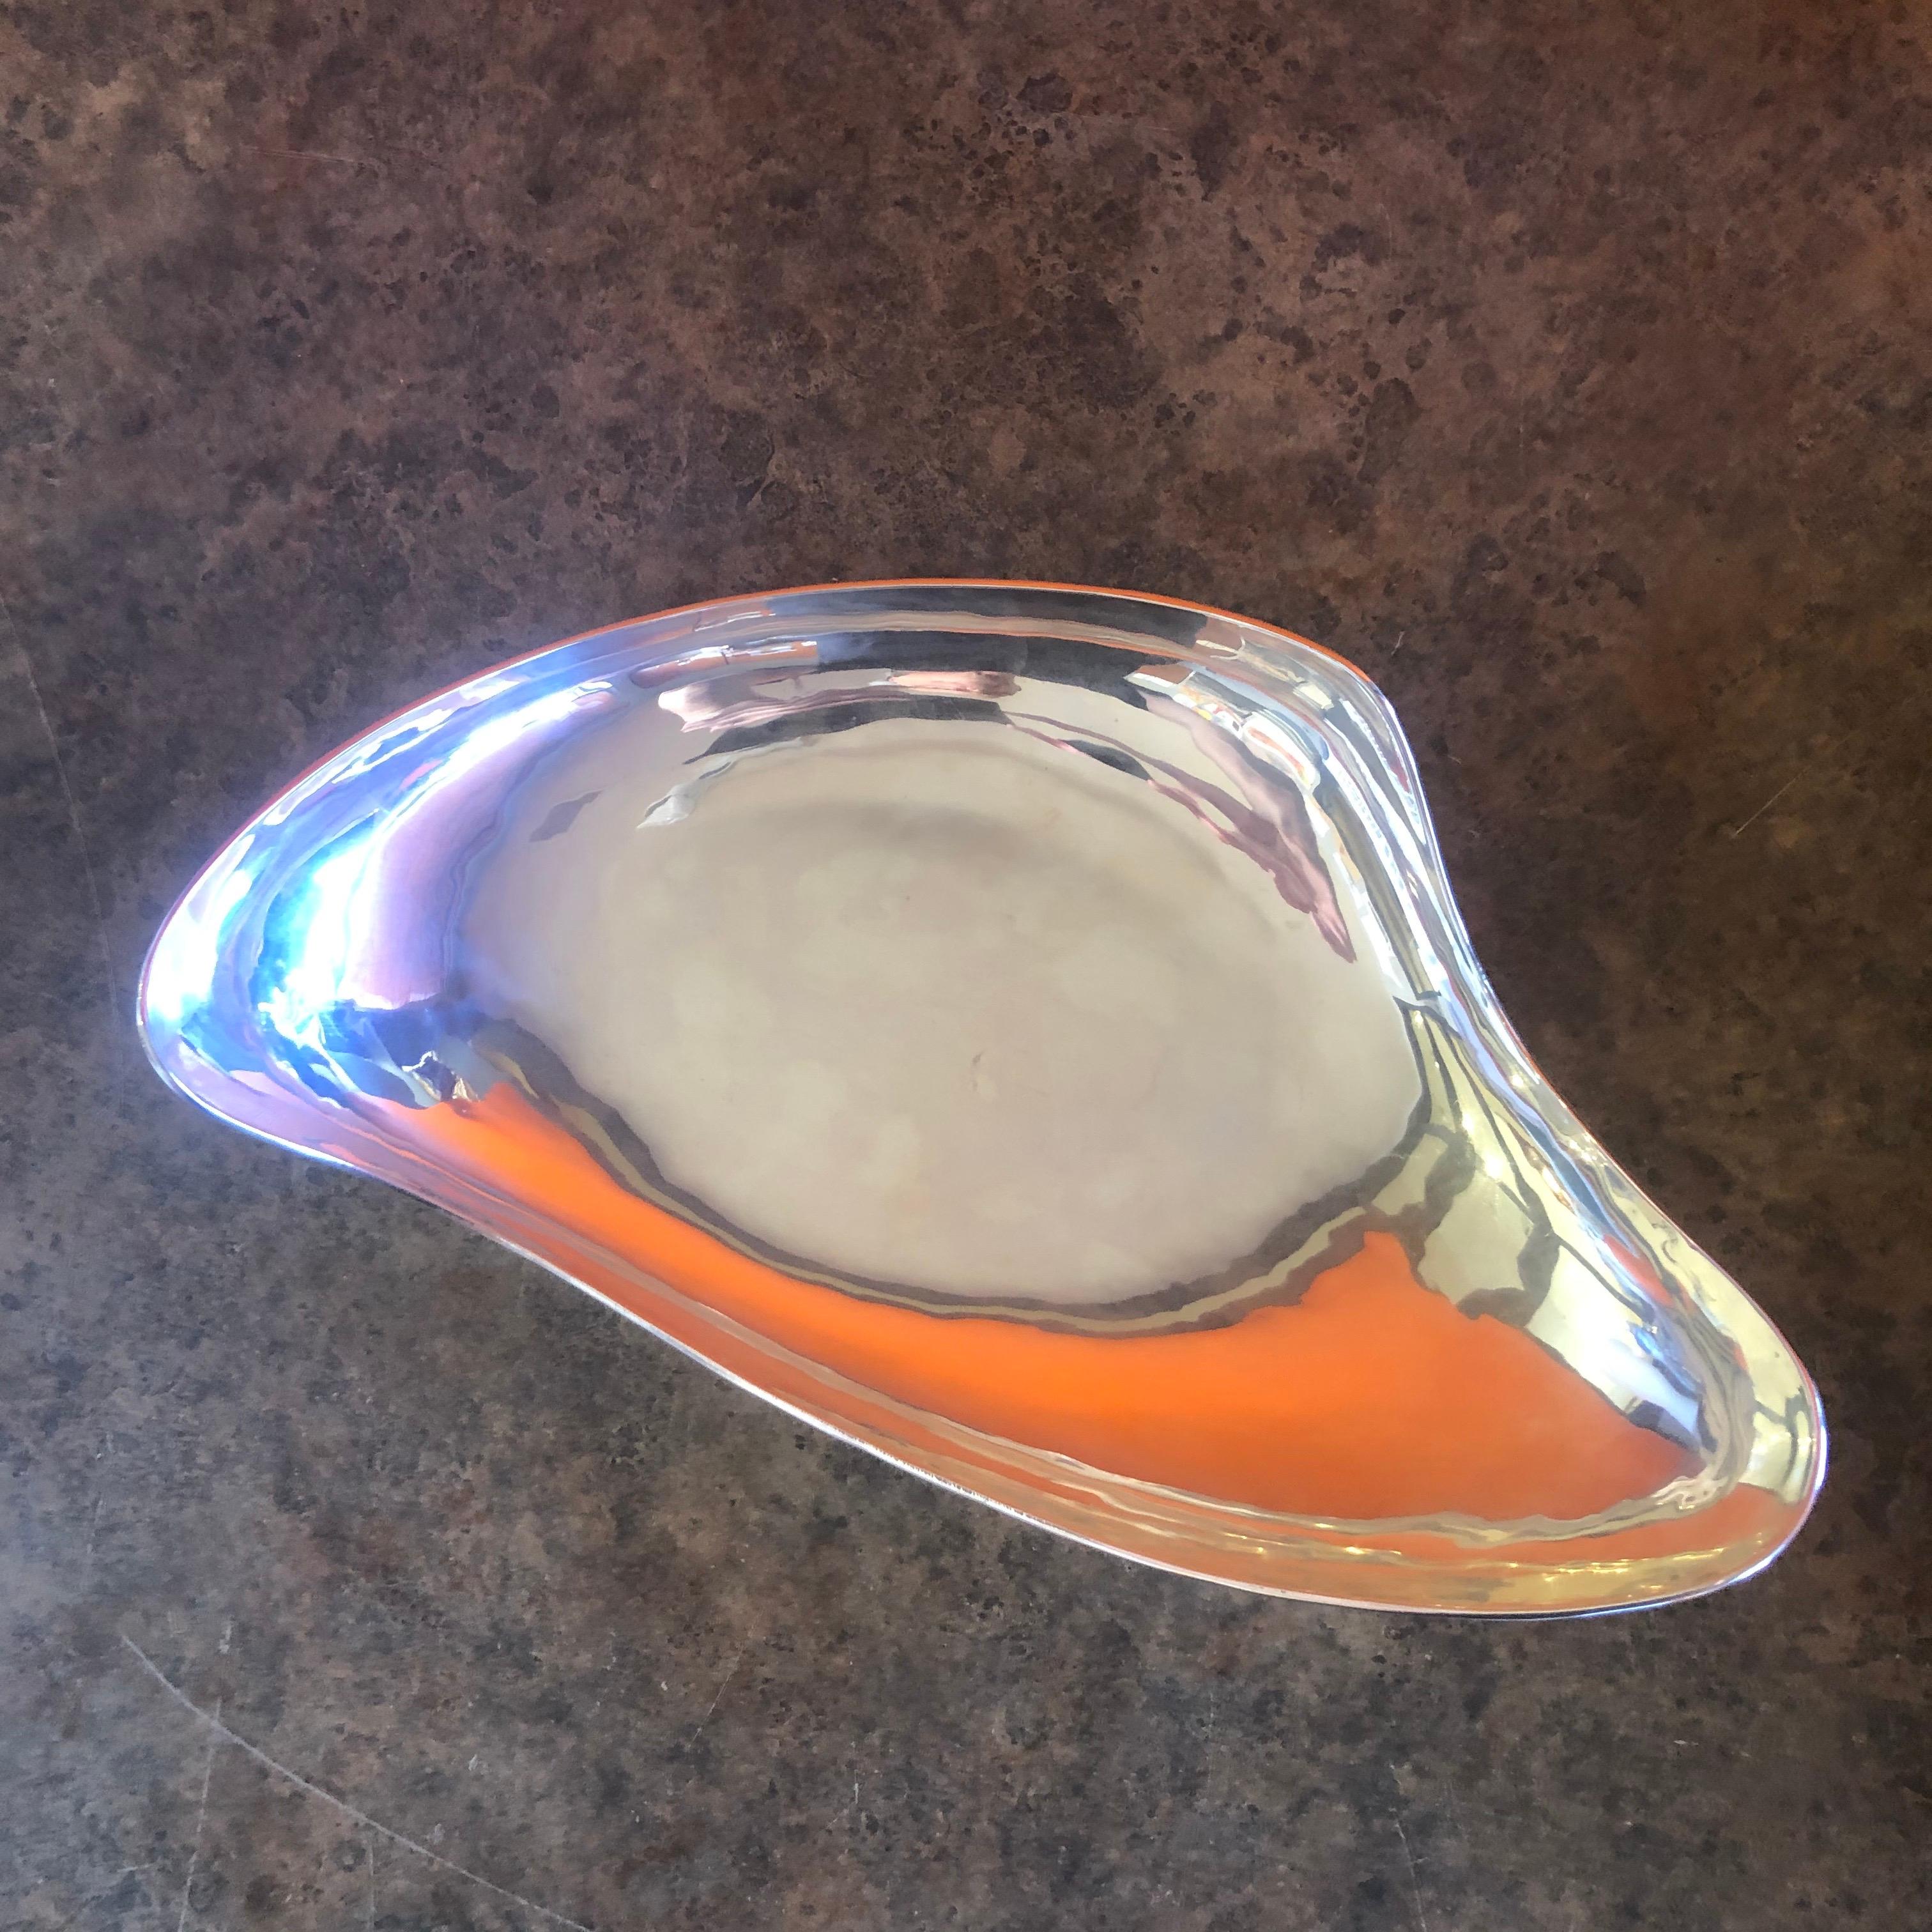 Spectacular midcentury freeform sterling silver bowl by Juvento Lopez Reyes, circa 1960s. This rare piece is gorgeous and in very good vintage condition. Signed with impressed manufacturer's mark to underside: 